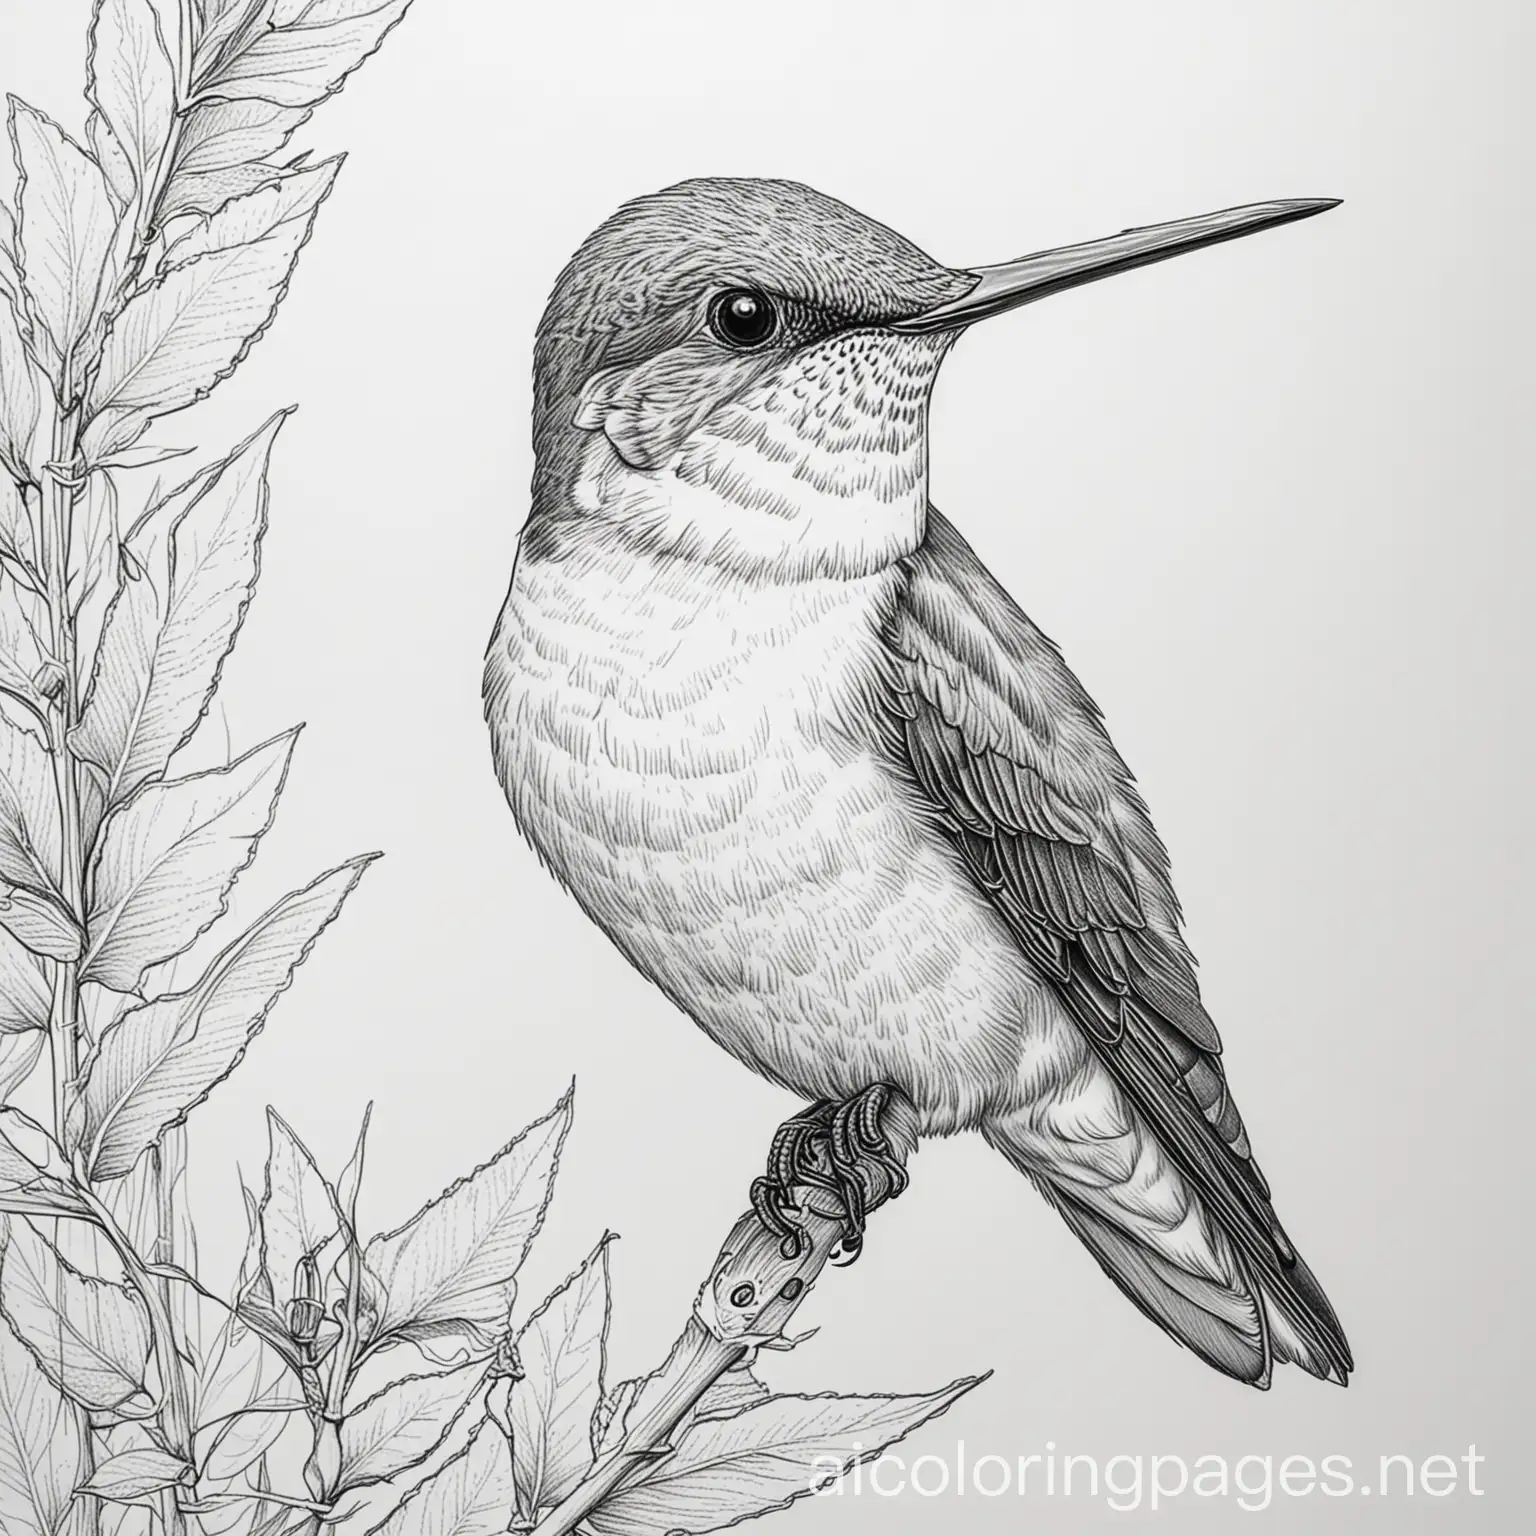 Ruby red-throated hummingbird, Coloring Page, black and white, line art, white background, Simplicity, Ample White Space. The background of the coloring page is plain white to make it easy for young children to color within the lines. The outlines of all the subjects are easy to distinguish, making it simple for kids to color without too much difficulty